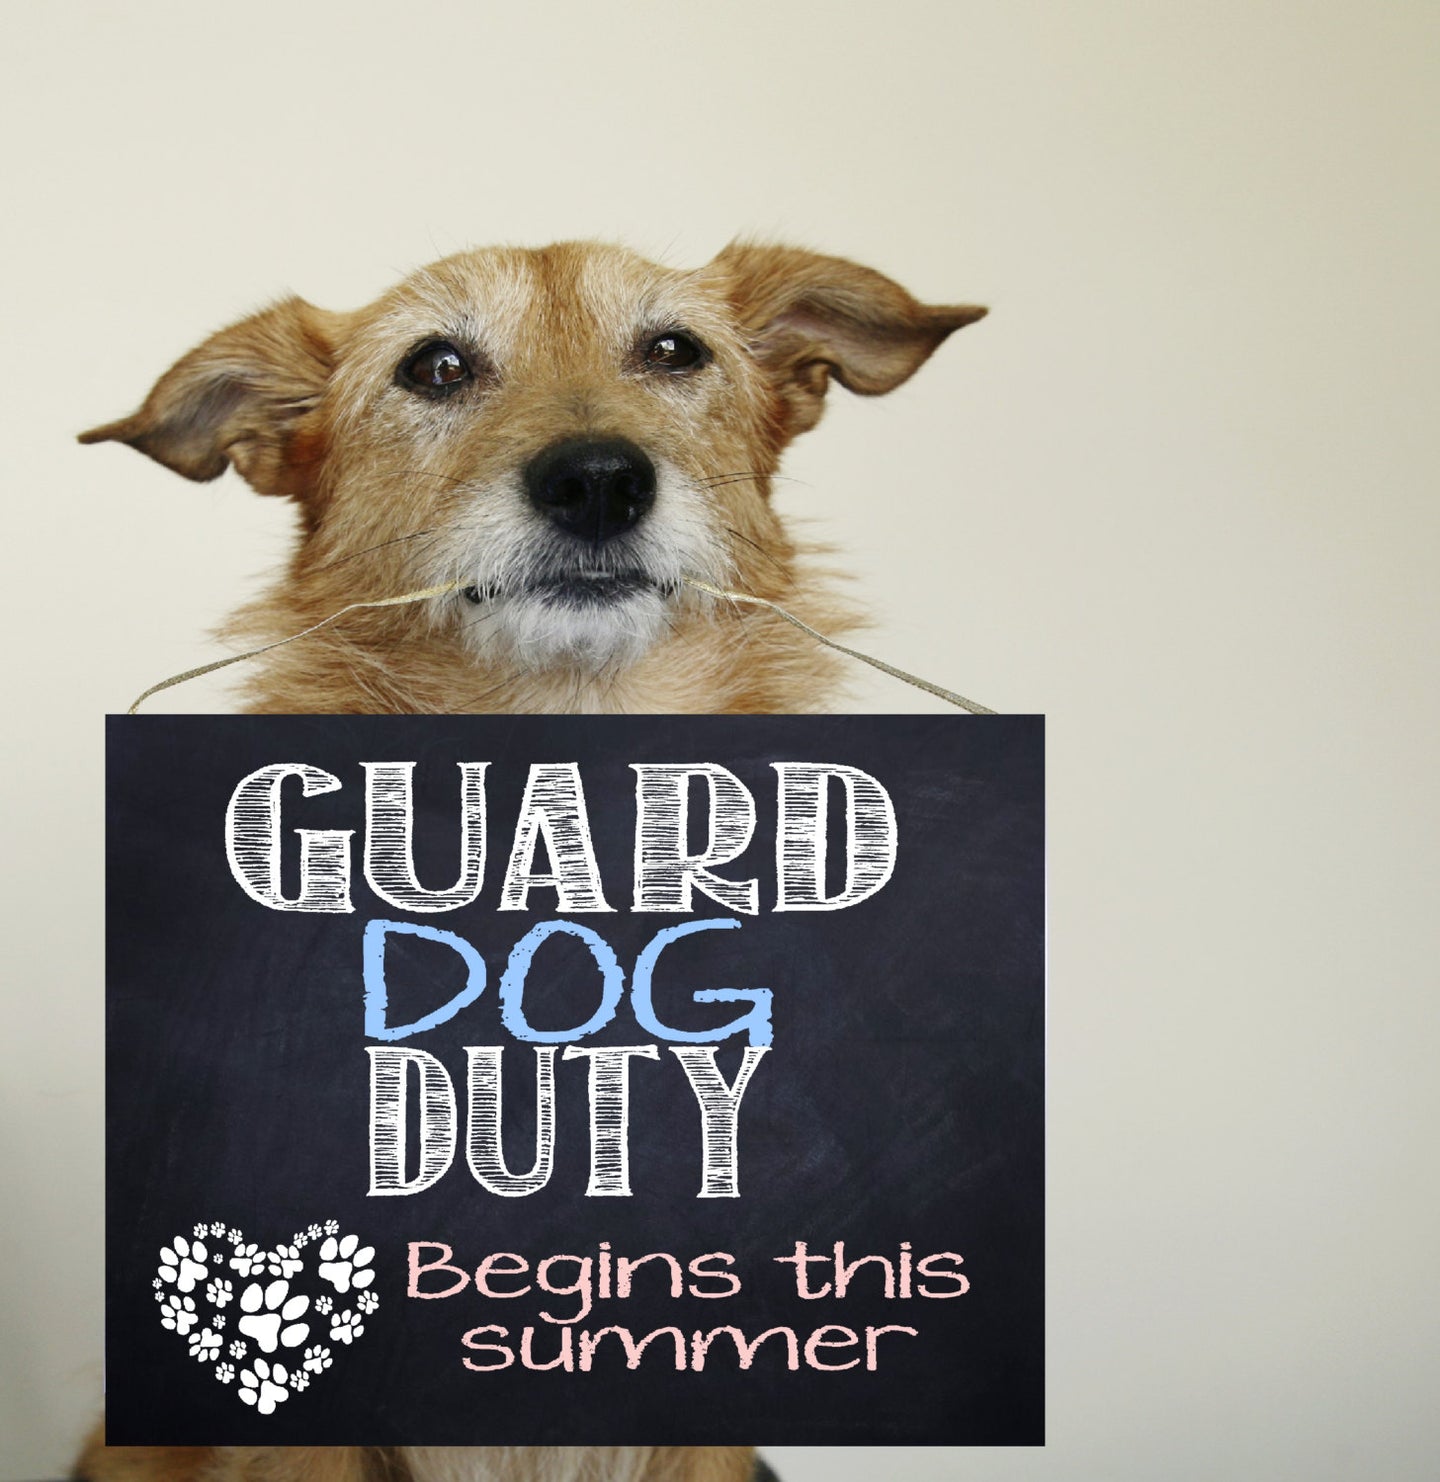 Guard dog on duty baby, expecting, pregnancy announcement, maternity, photo prop, chalk board,  sign,  puppy, surprise